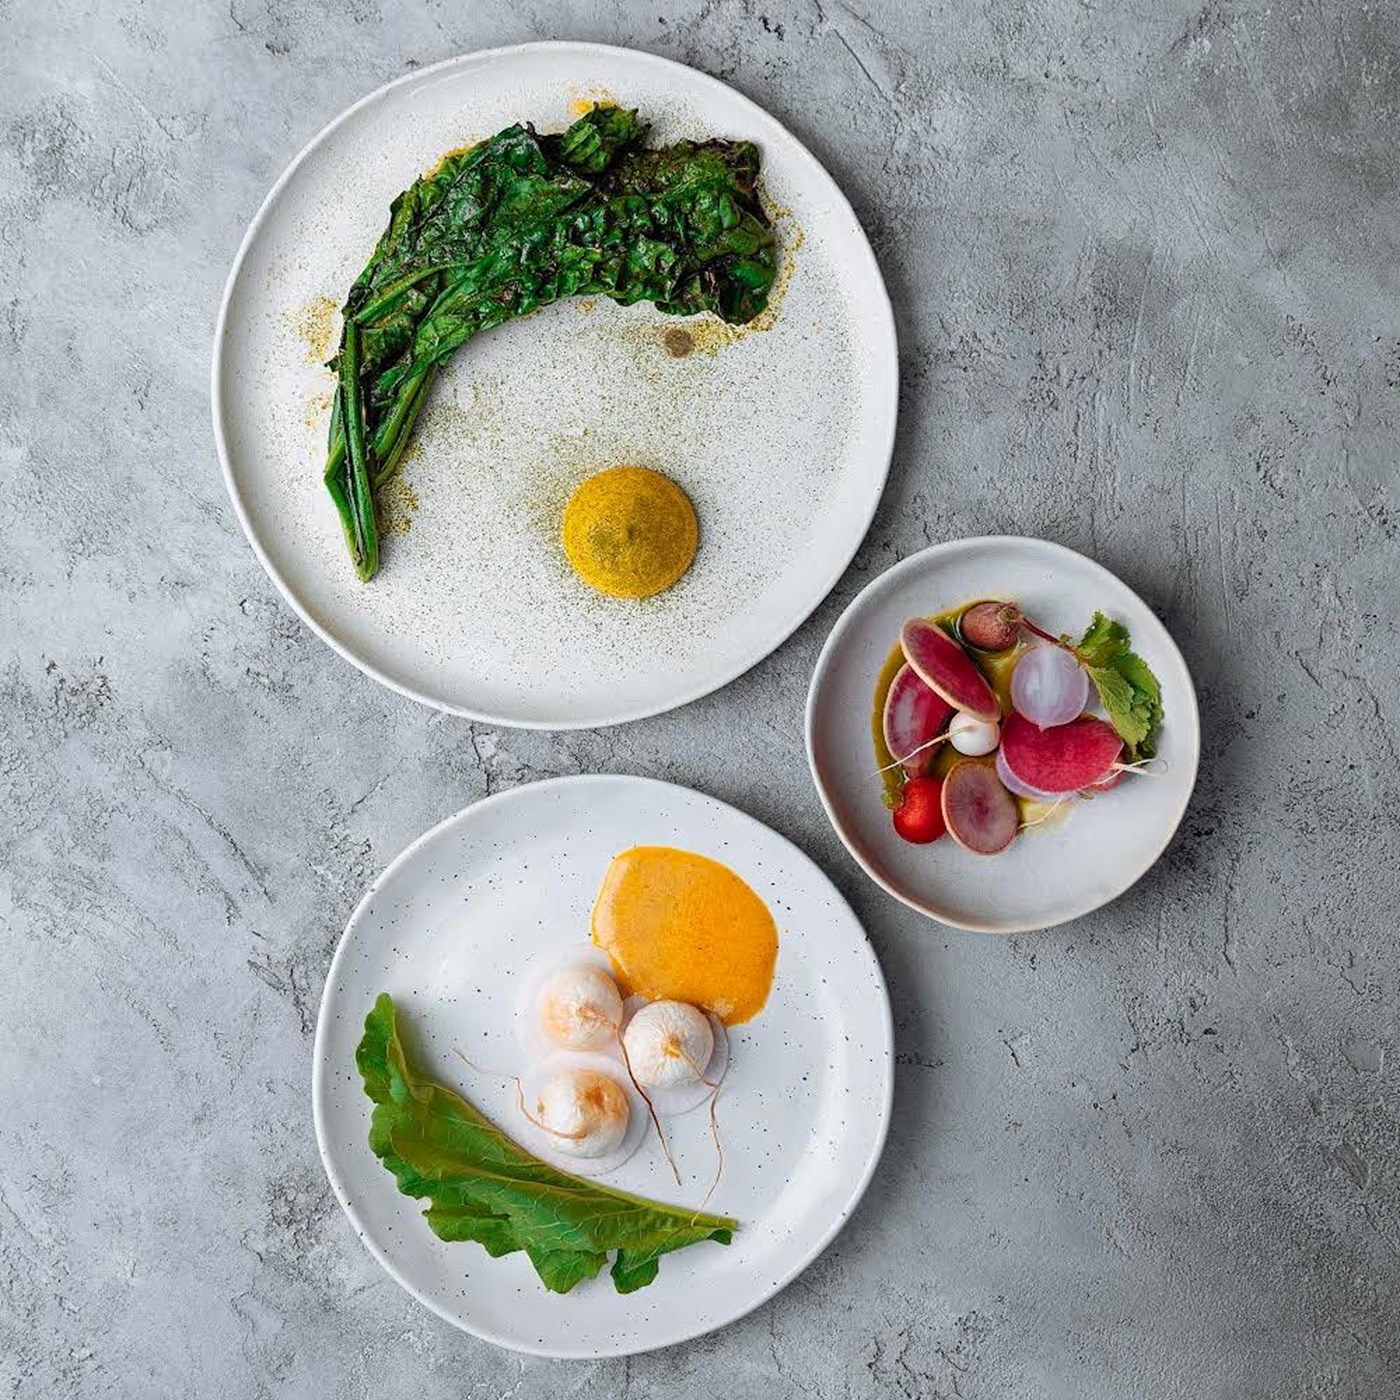 Three artfully presented vegetable dishes against concrete with the photo taken from above 